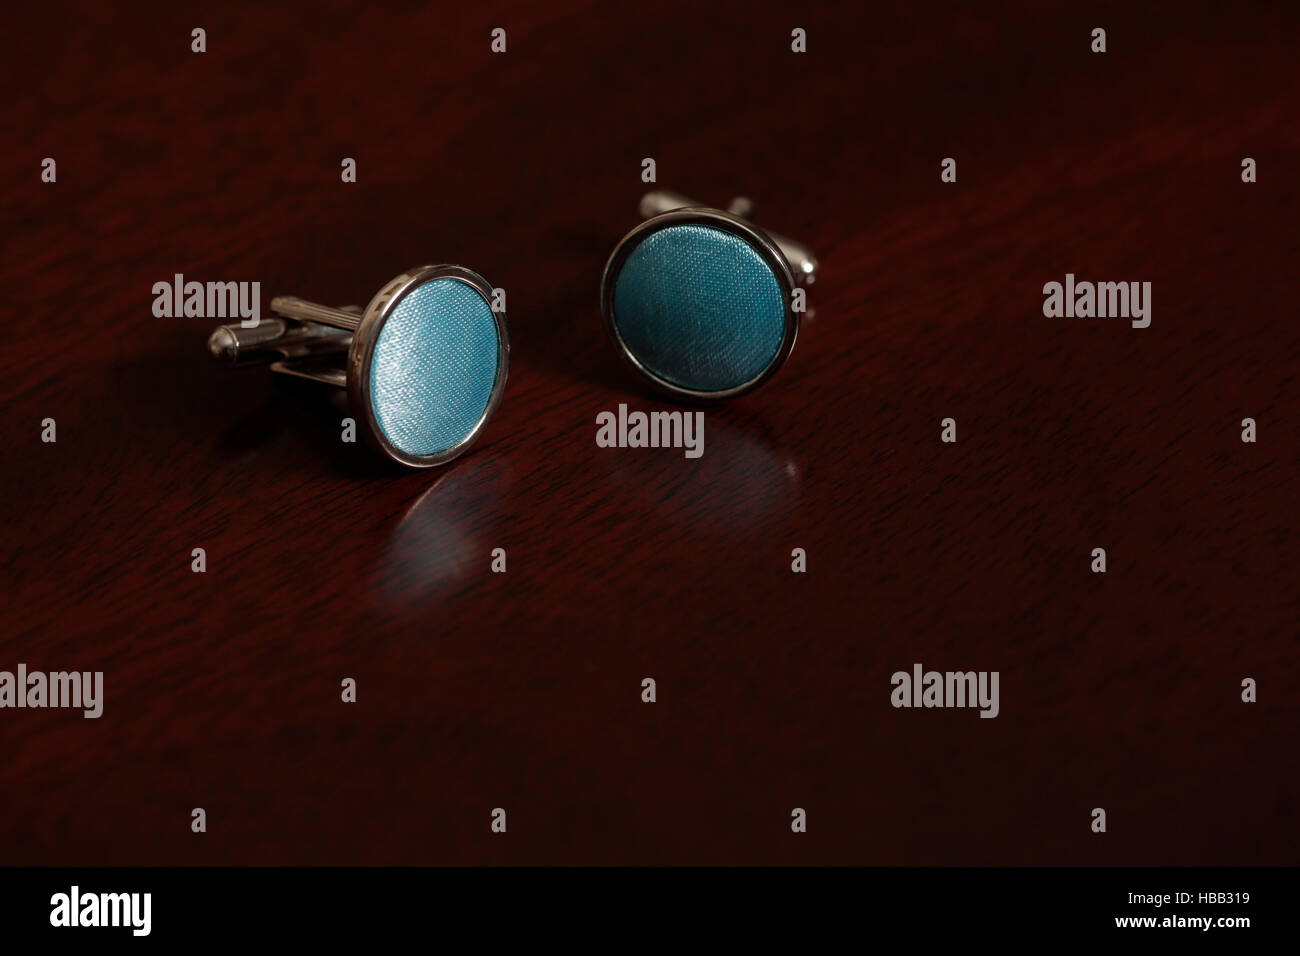 Cuff links and tie on mahogany wooden background Stock Photo